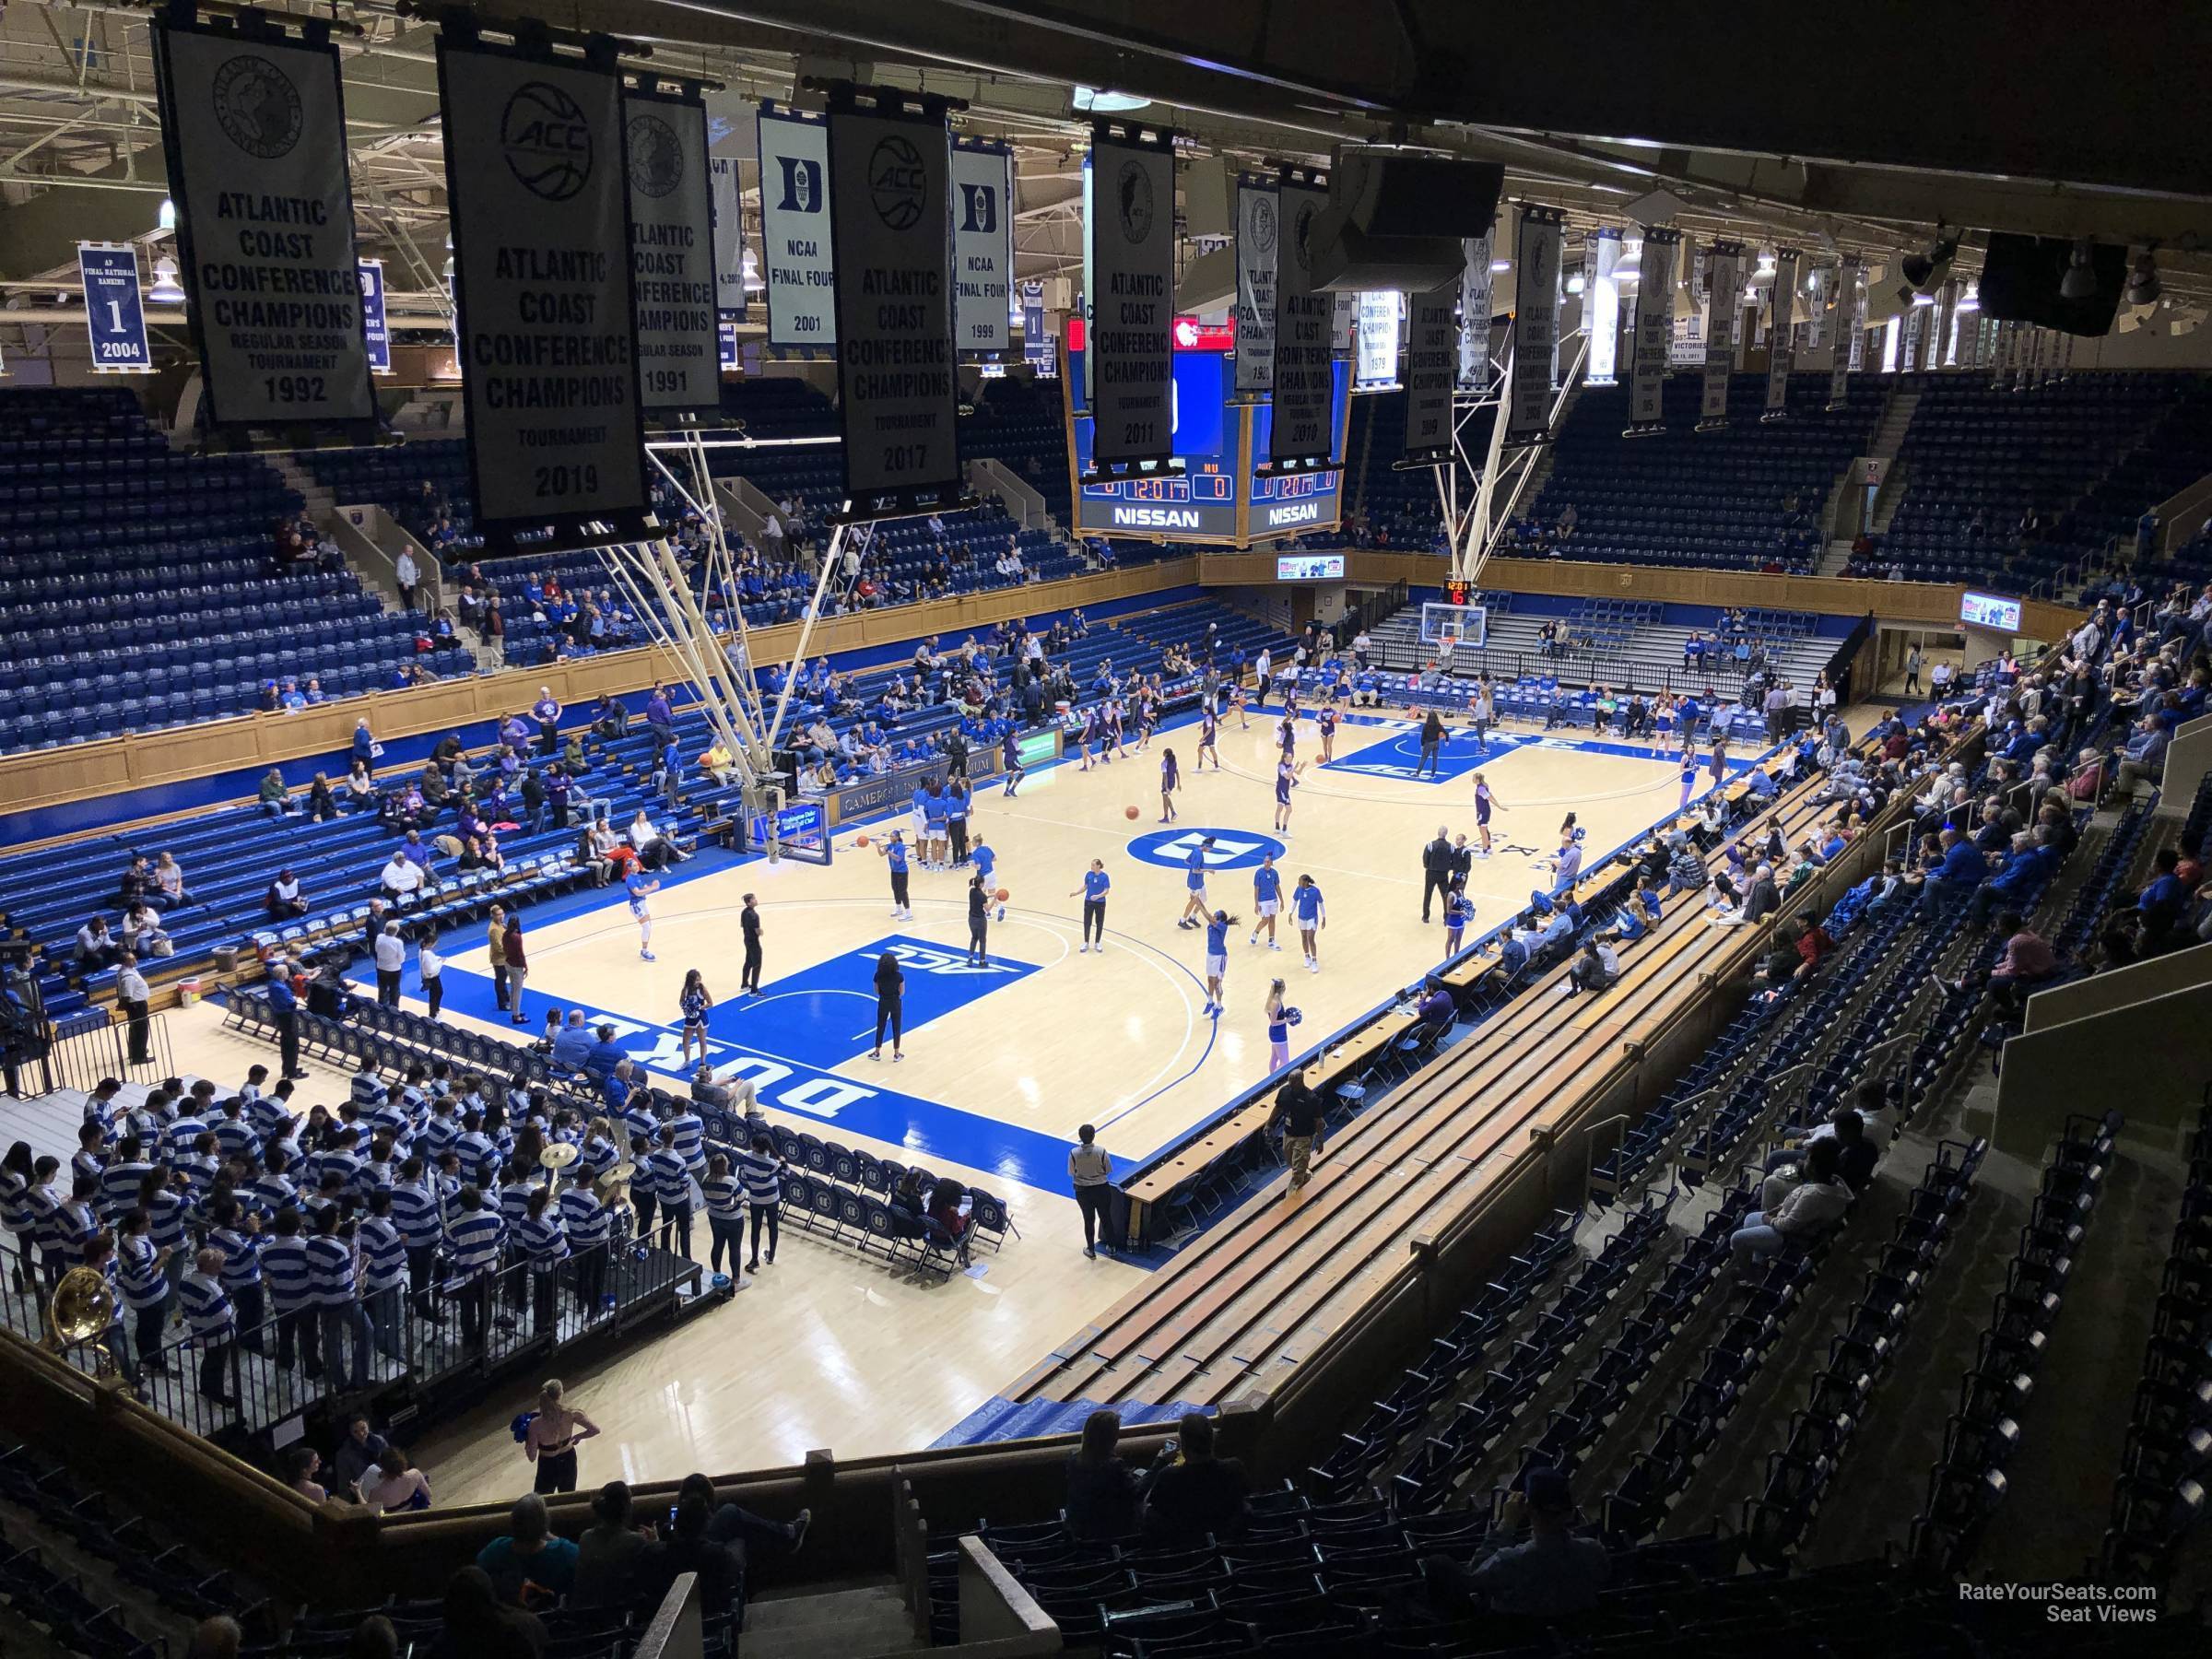 Section 12 at Cameron Indoor Arena - RateYourSeats.com